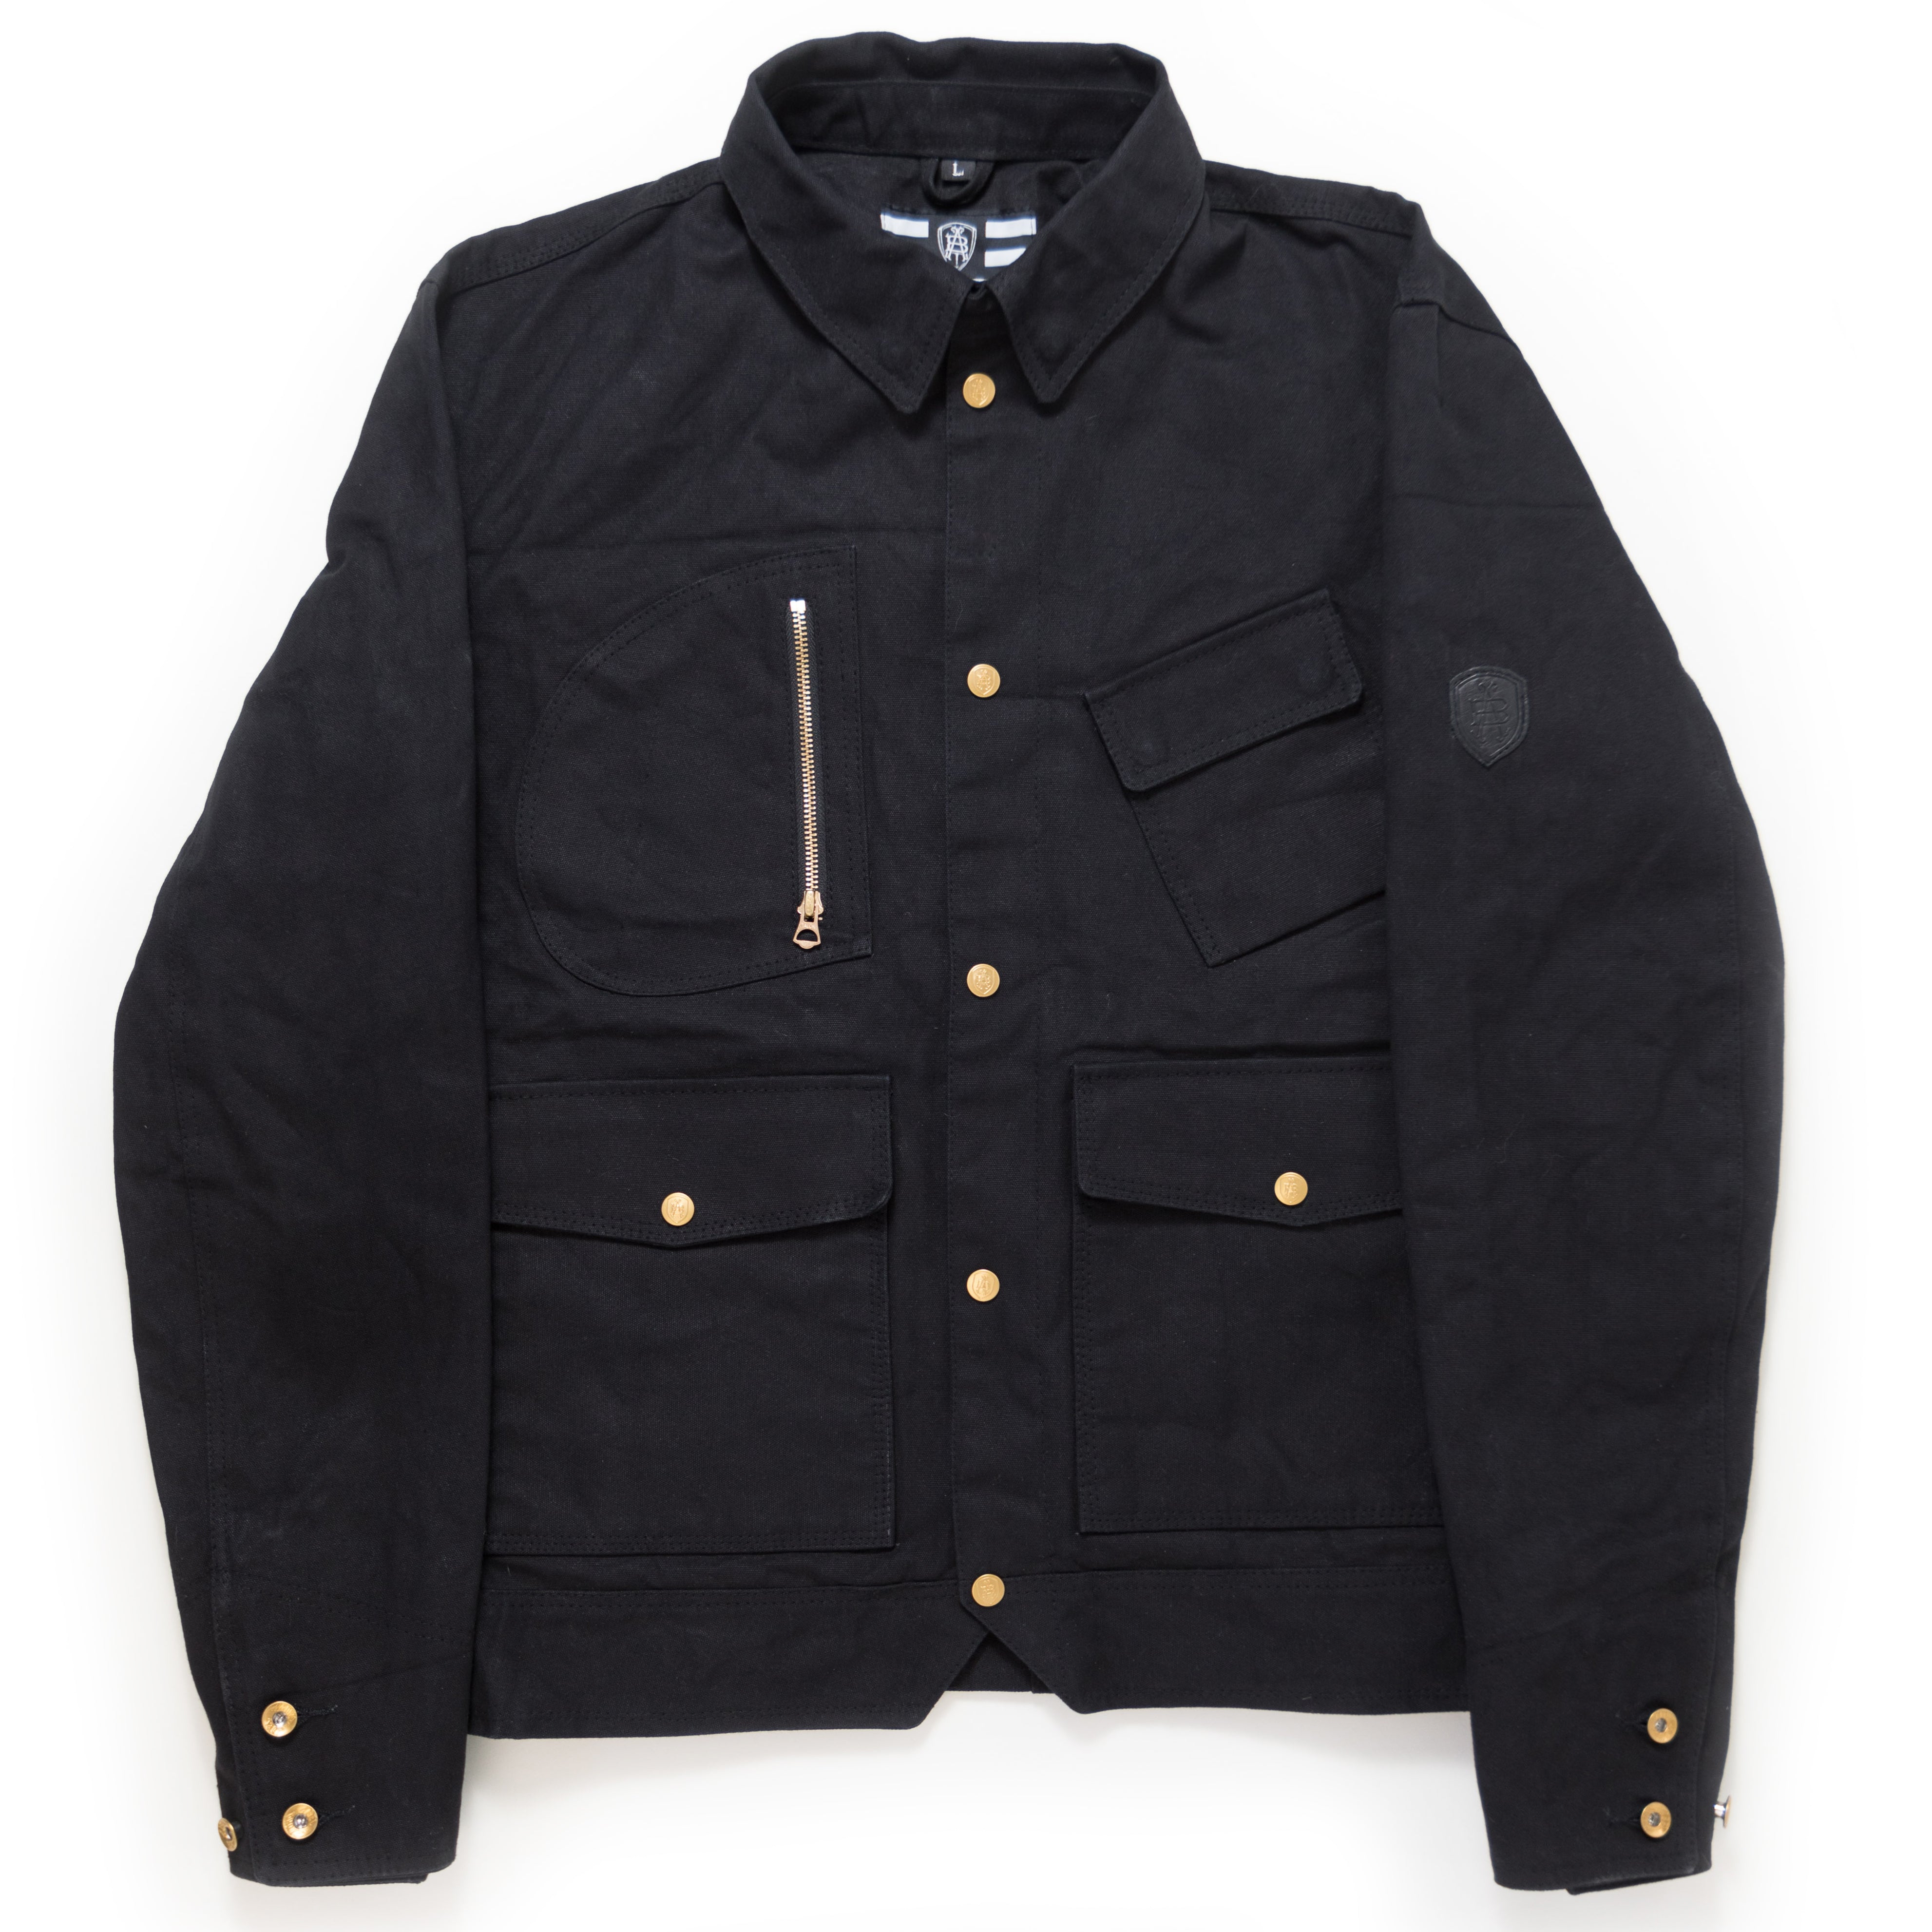 Fremont Waxed Cotton Jacket - Motorcycle Riding Gear | Abel Brown